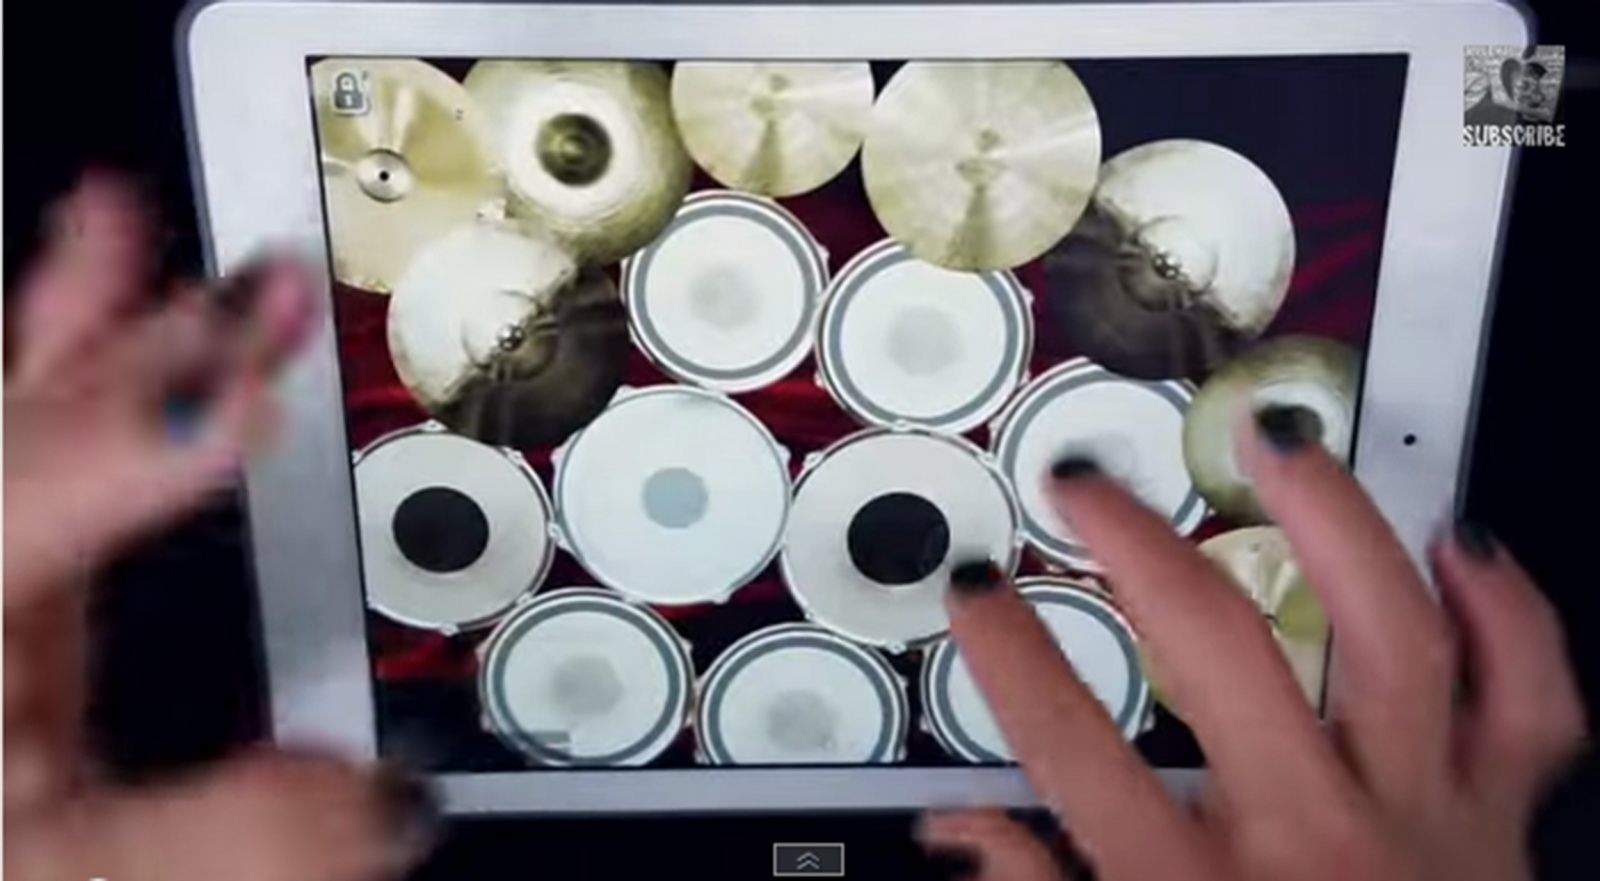 The fingers of Apple Man keeps up to Marilyn Manson's The Beautiful People. Photo: Apple Man/YouTube